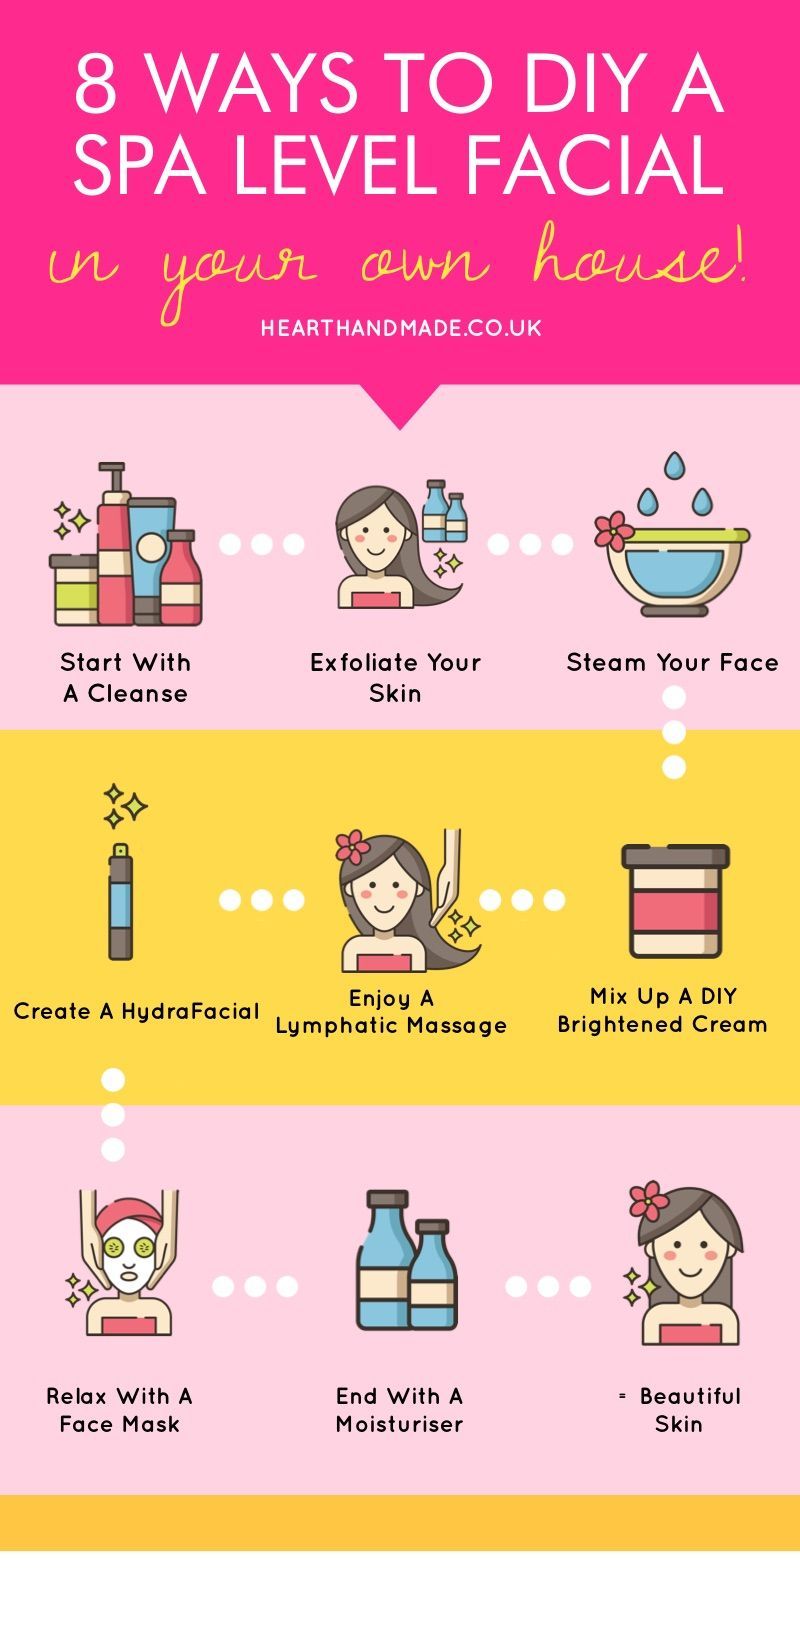 17 how to get beauty Skin ideas